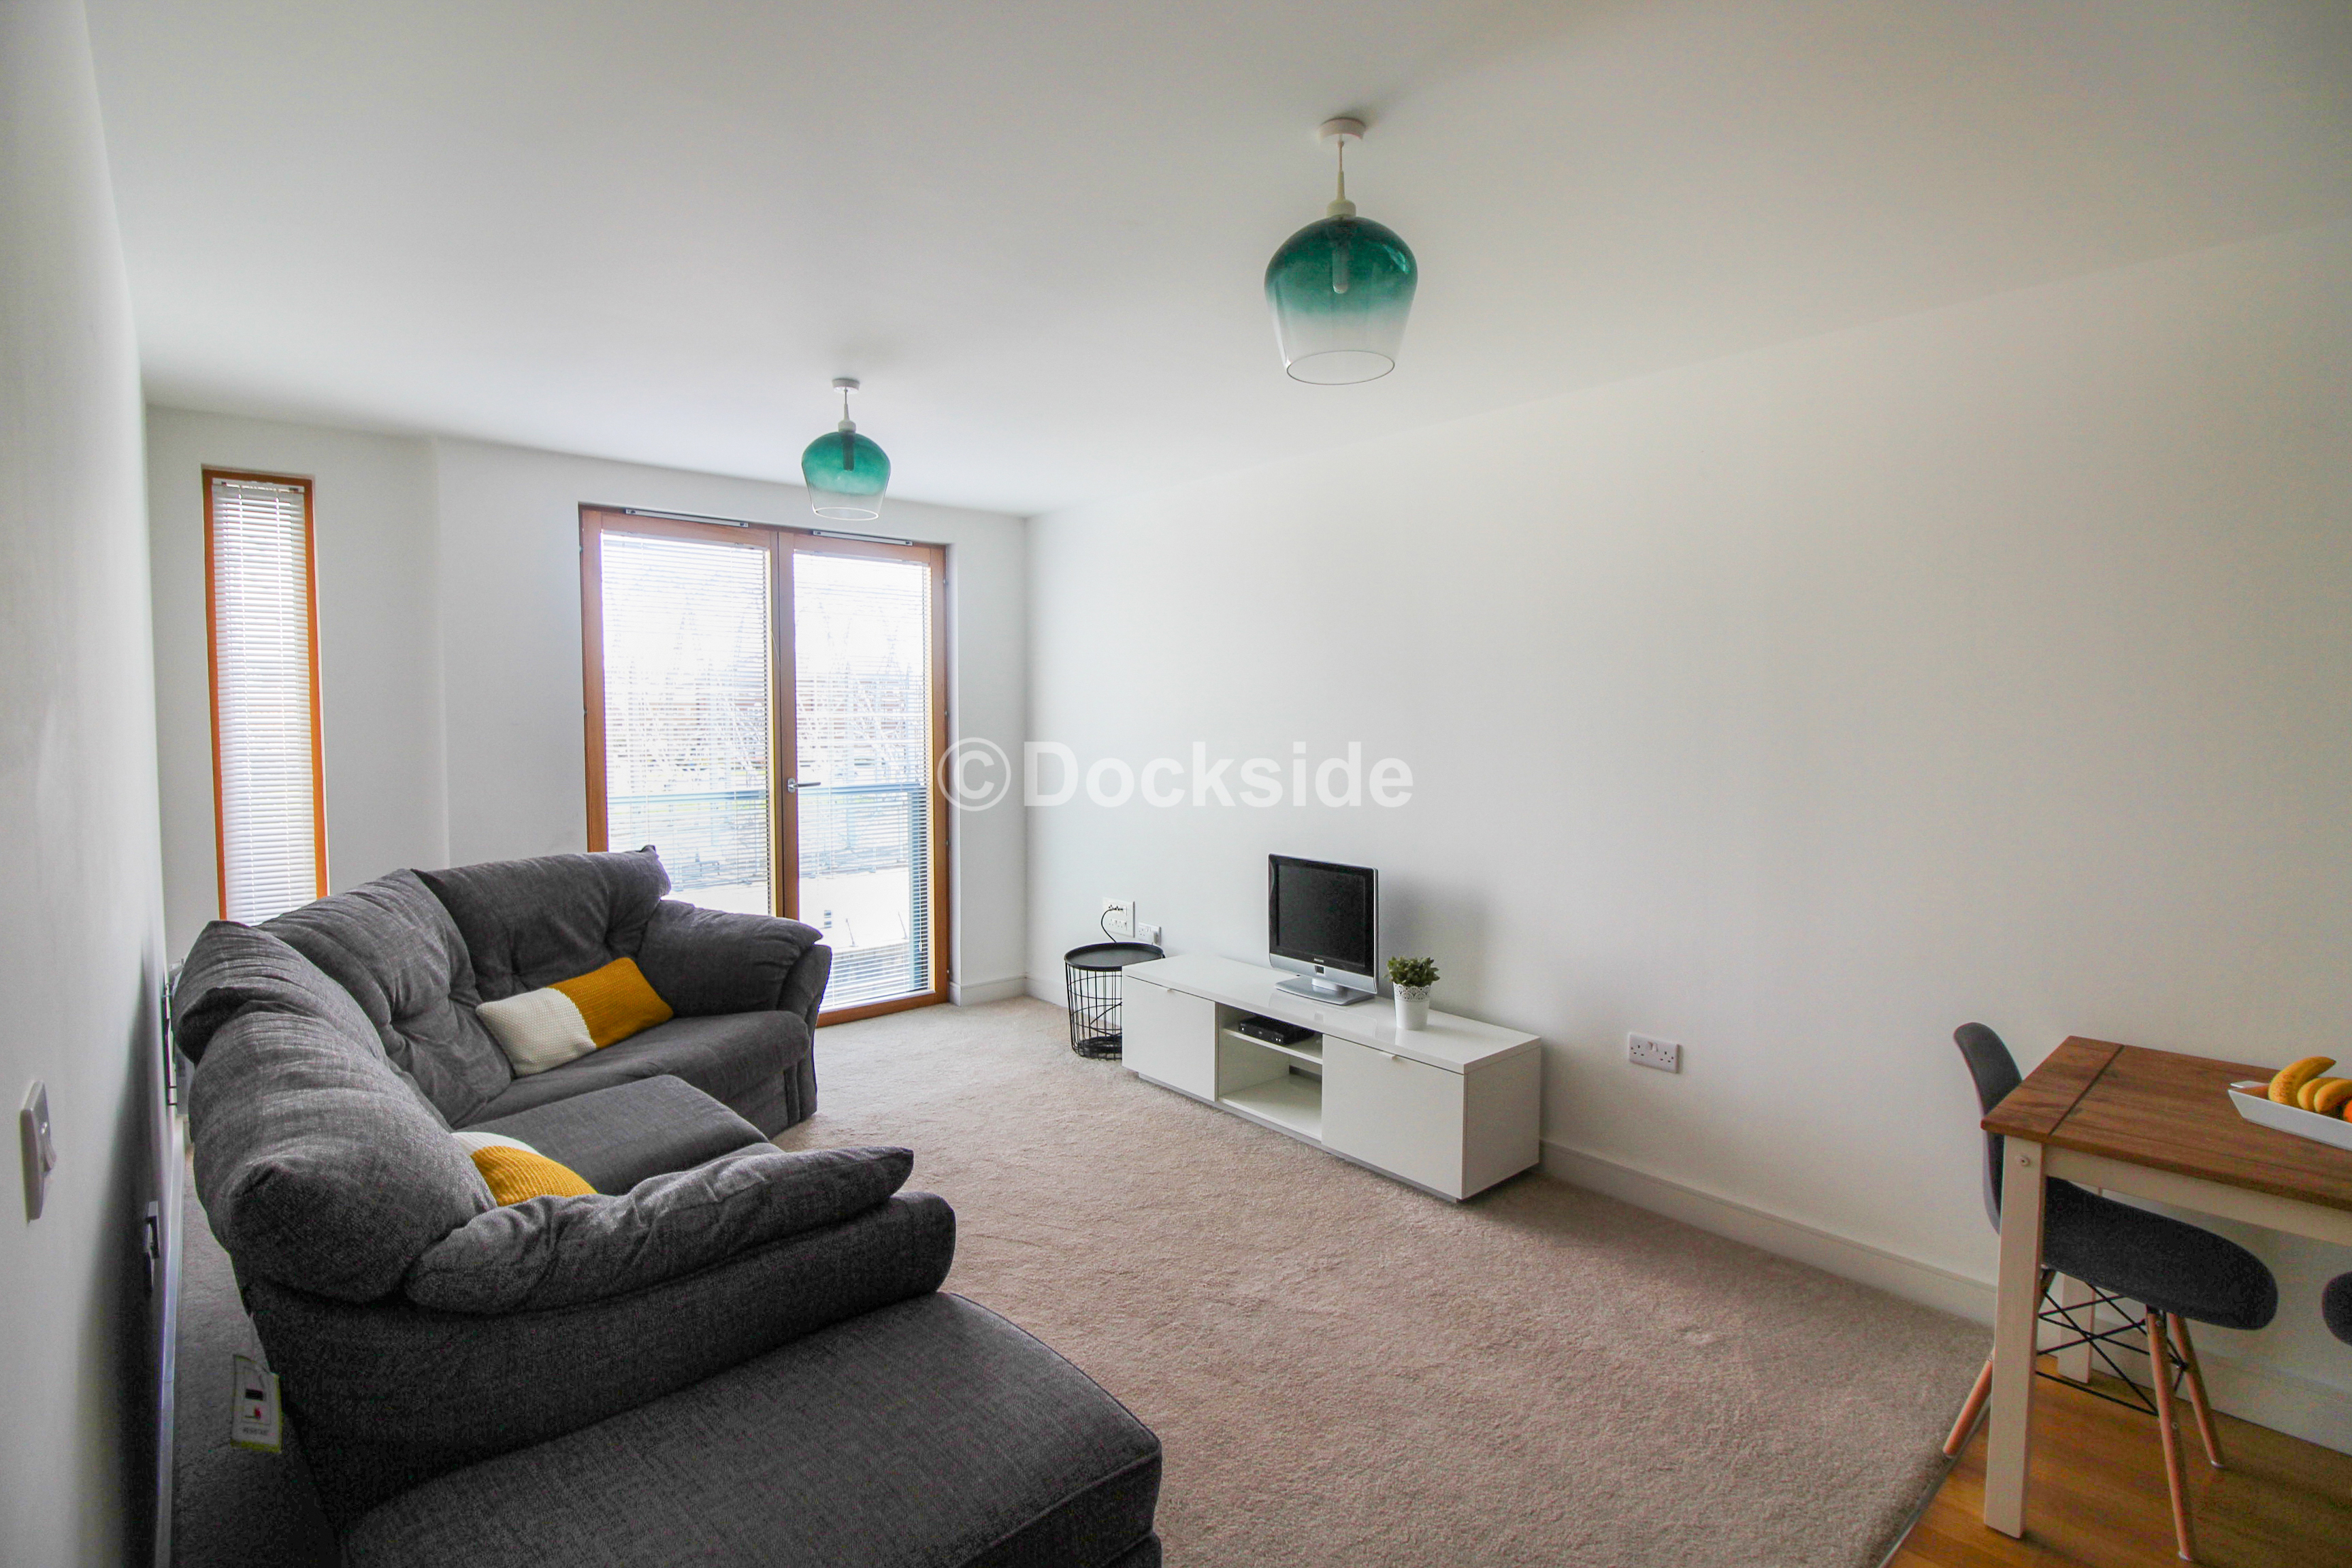 2 bed to rent in Dock Head Road, Chatham  - Property Image 1